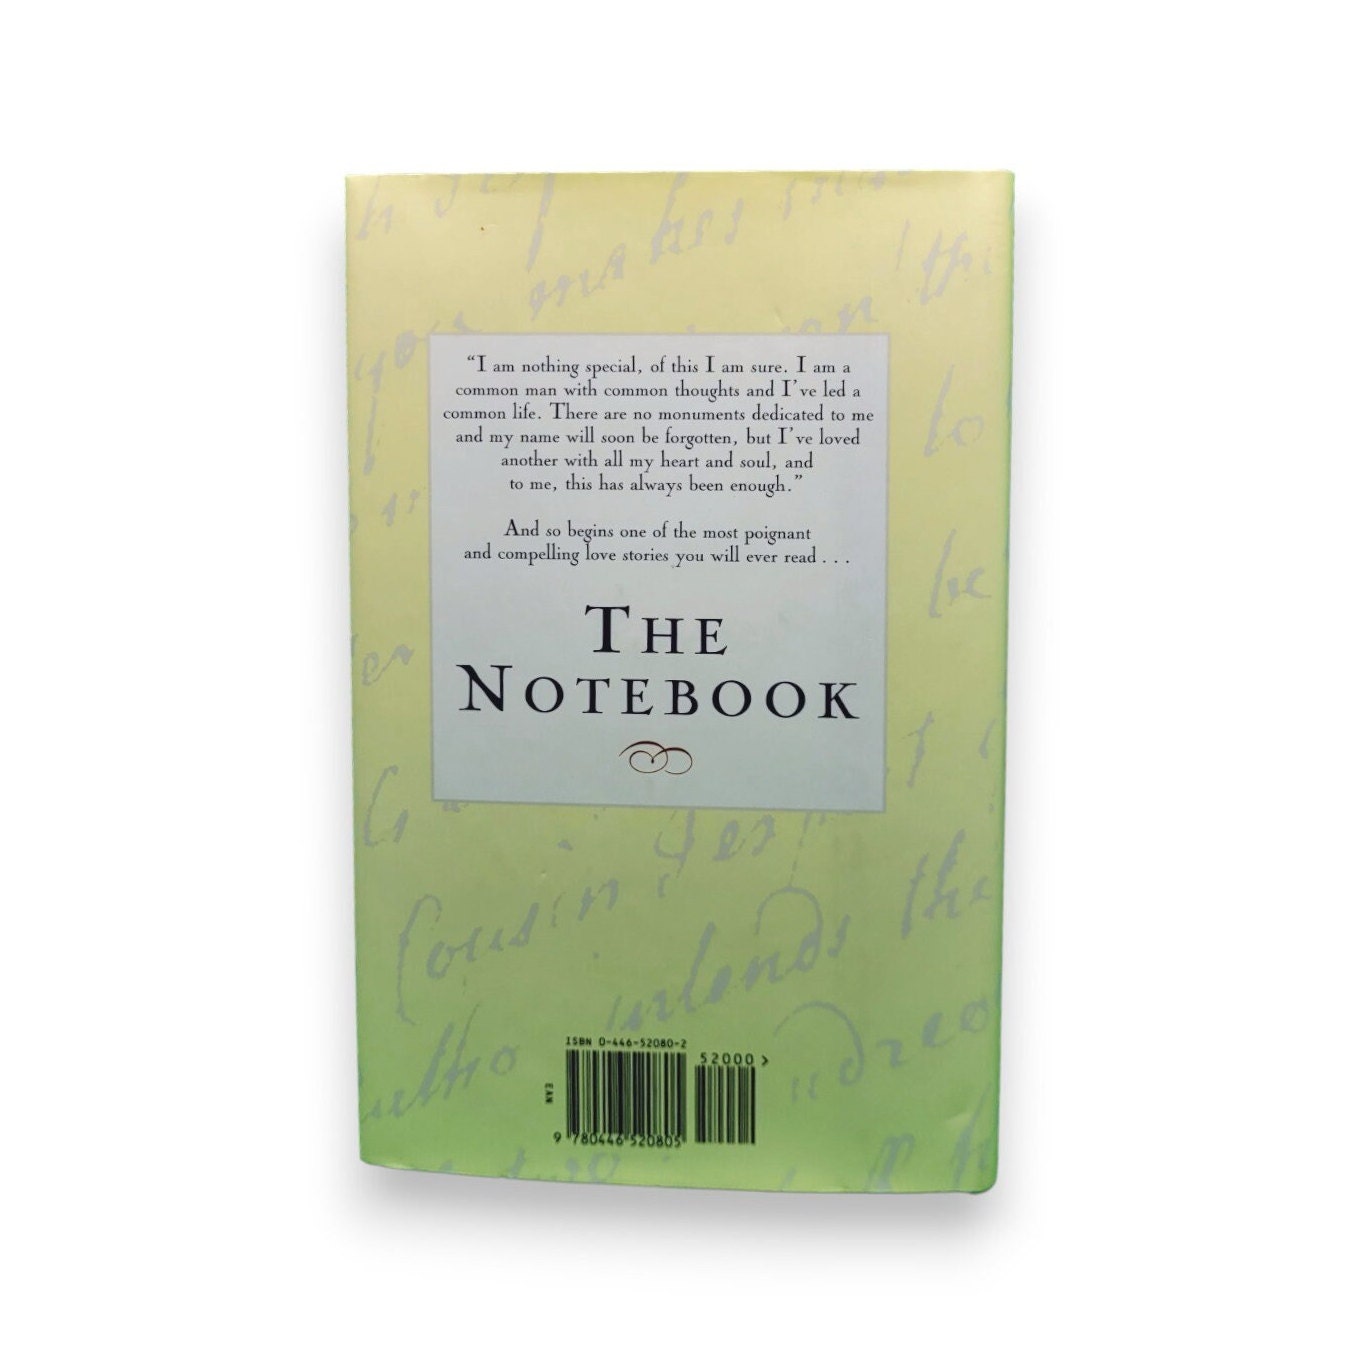 The Notebook by Nicholas Sparks 1996 *Like New*